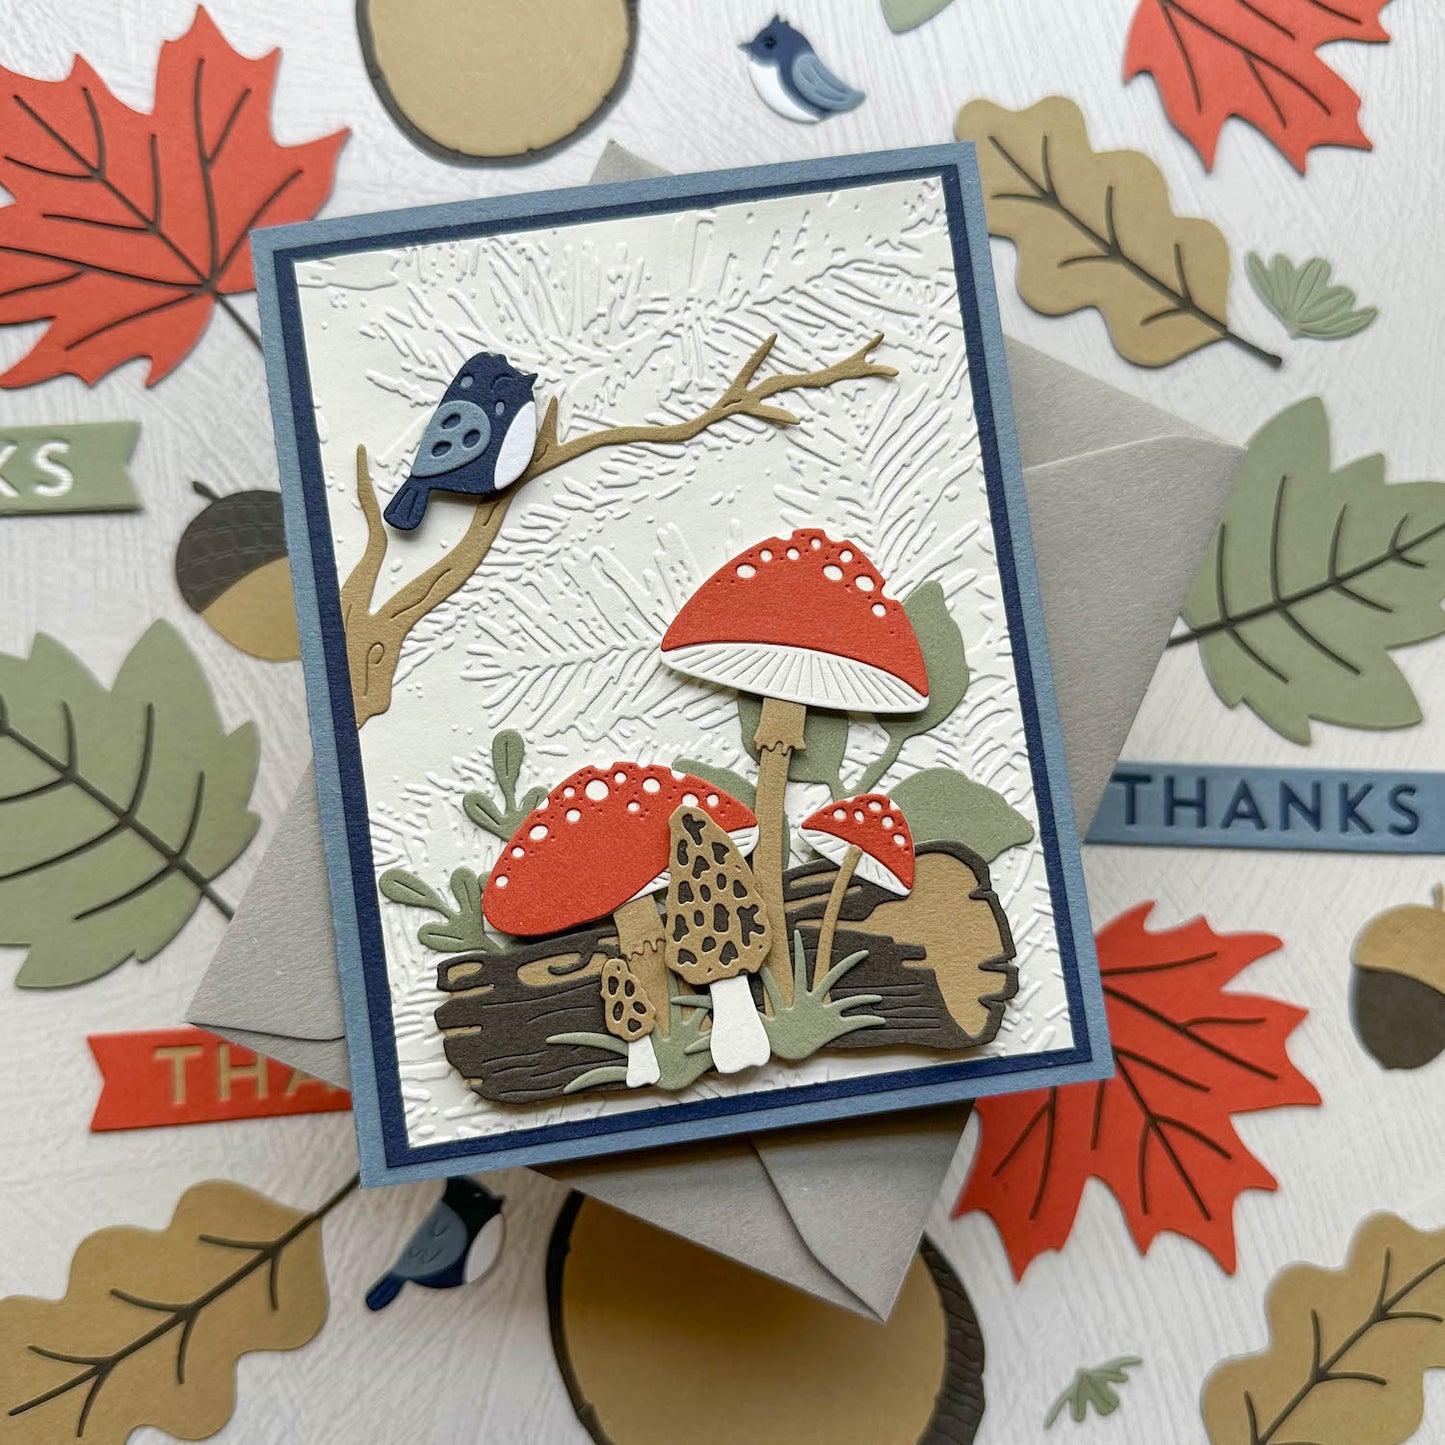 Materica Cardstock Nature Themed Greeting Card